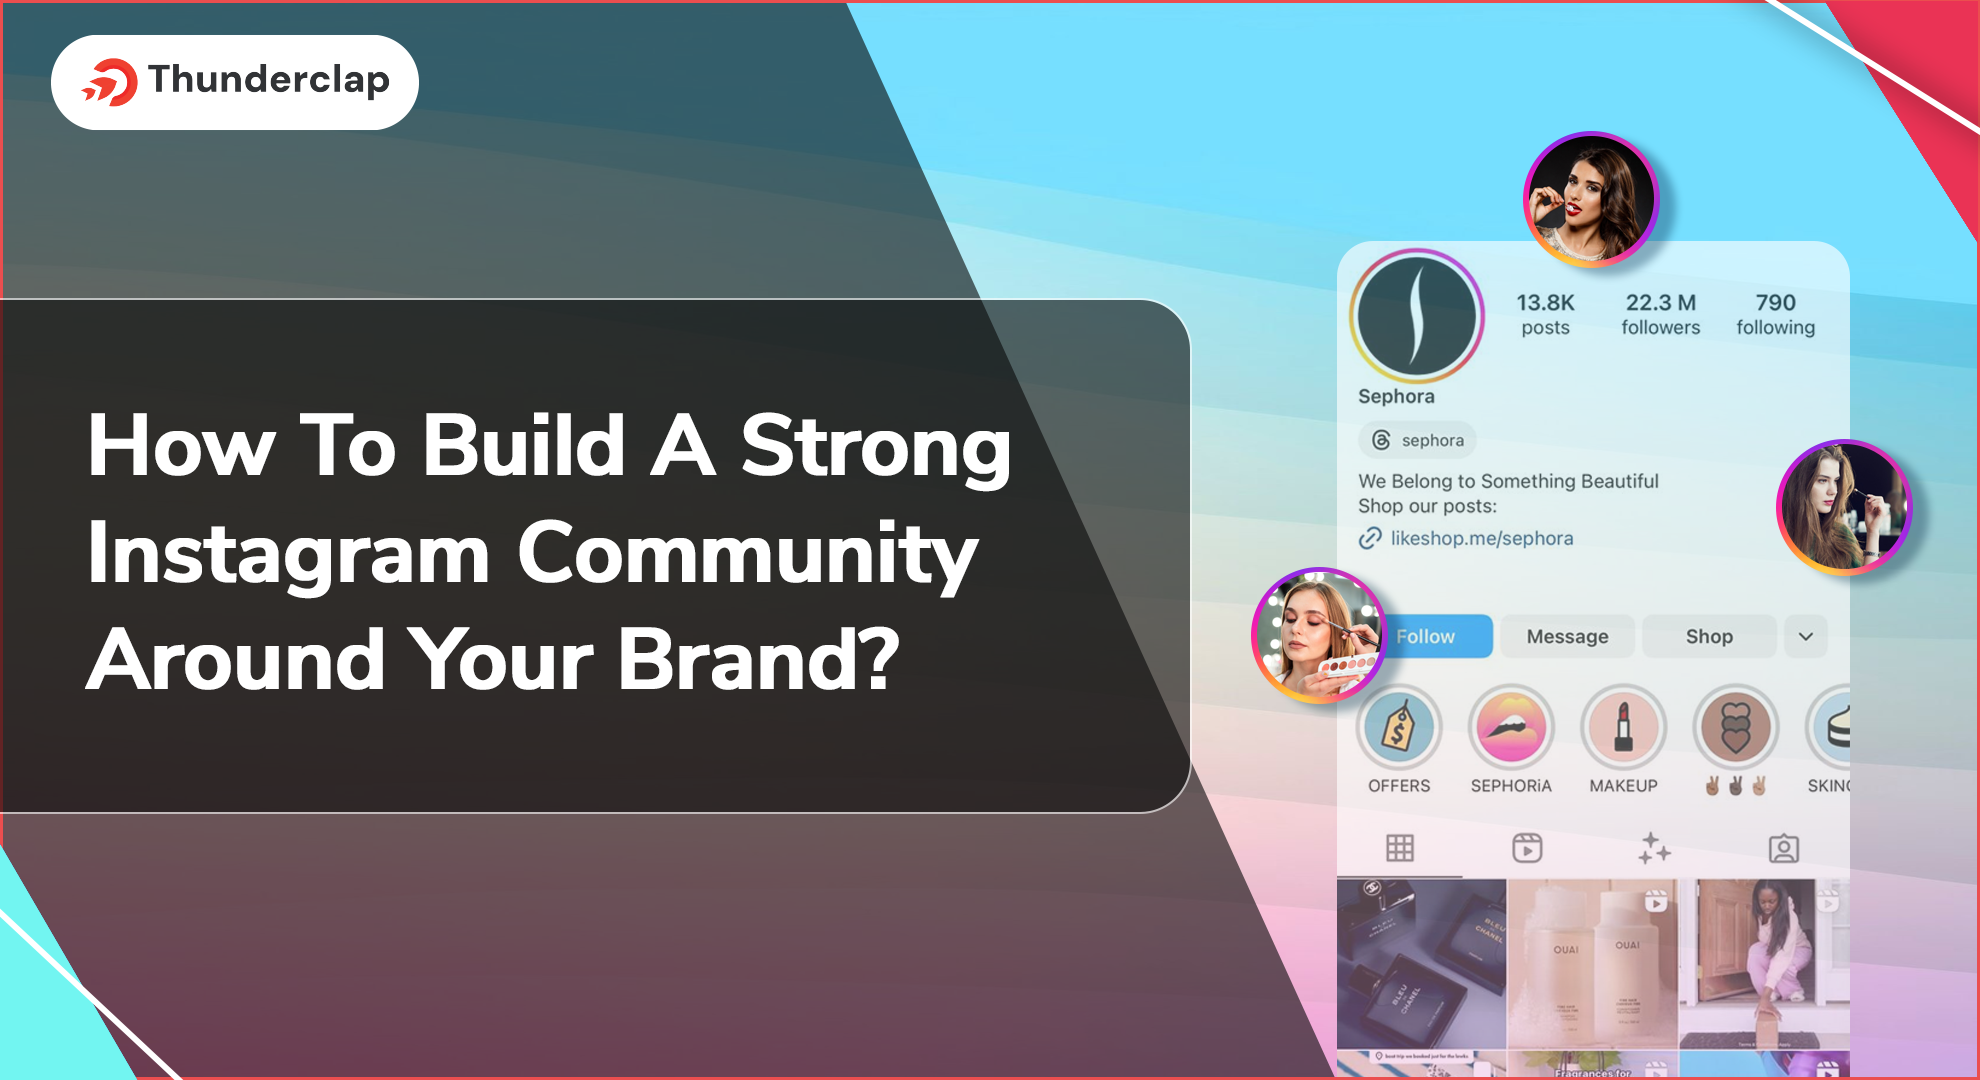 How To Build A Strong Instagram Community Around Your Brand?